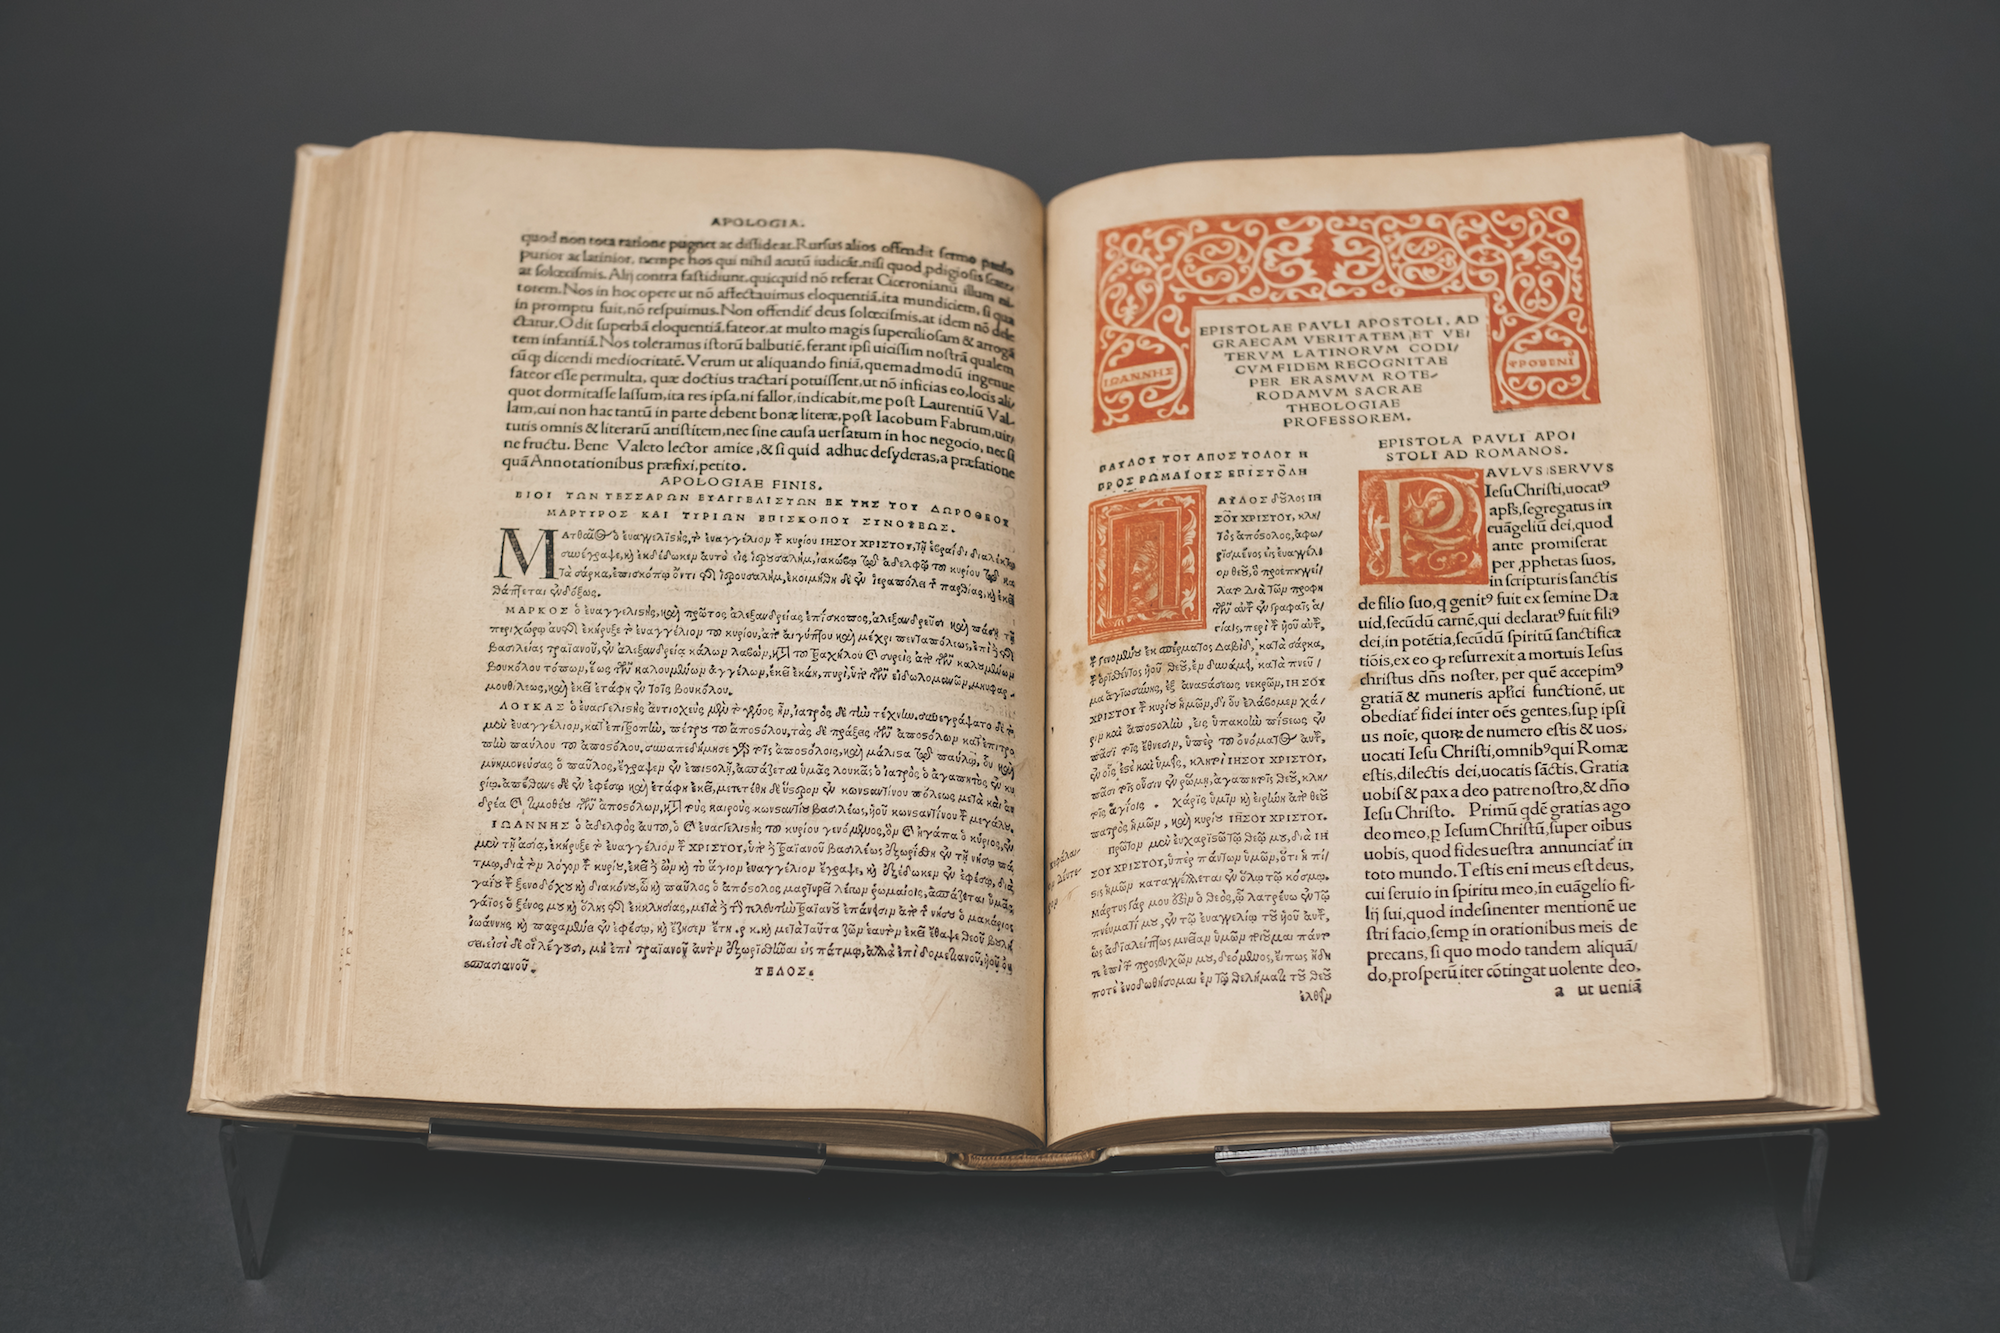 This original copy of the Erasmus Bible in Greek text, as well as his own Latin translation in parallel columns.